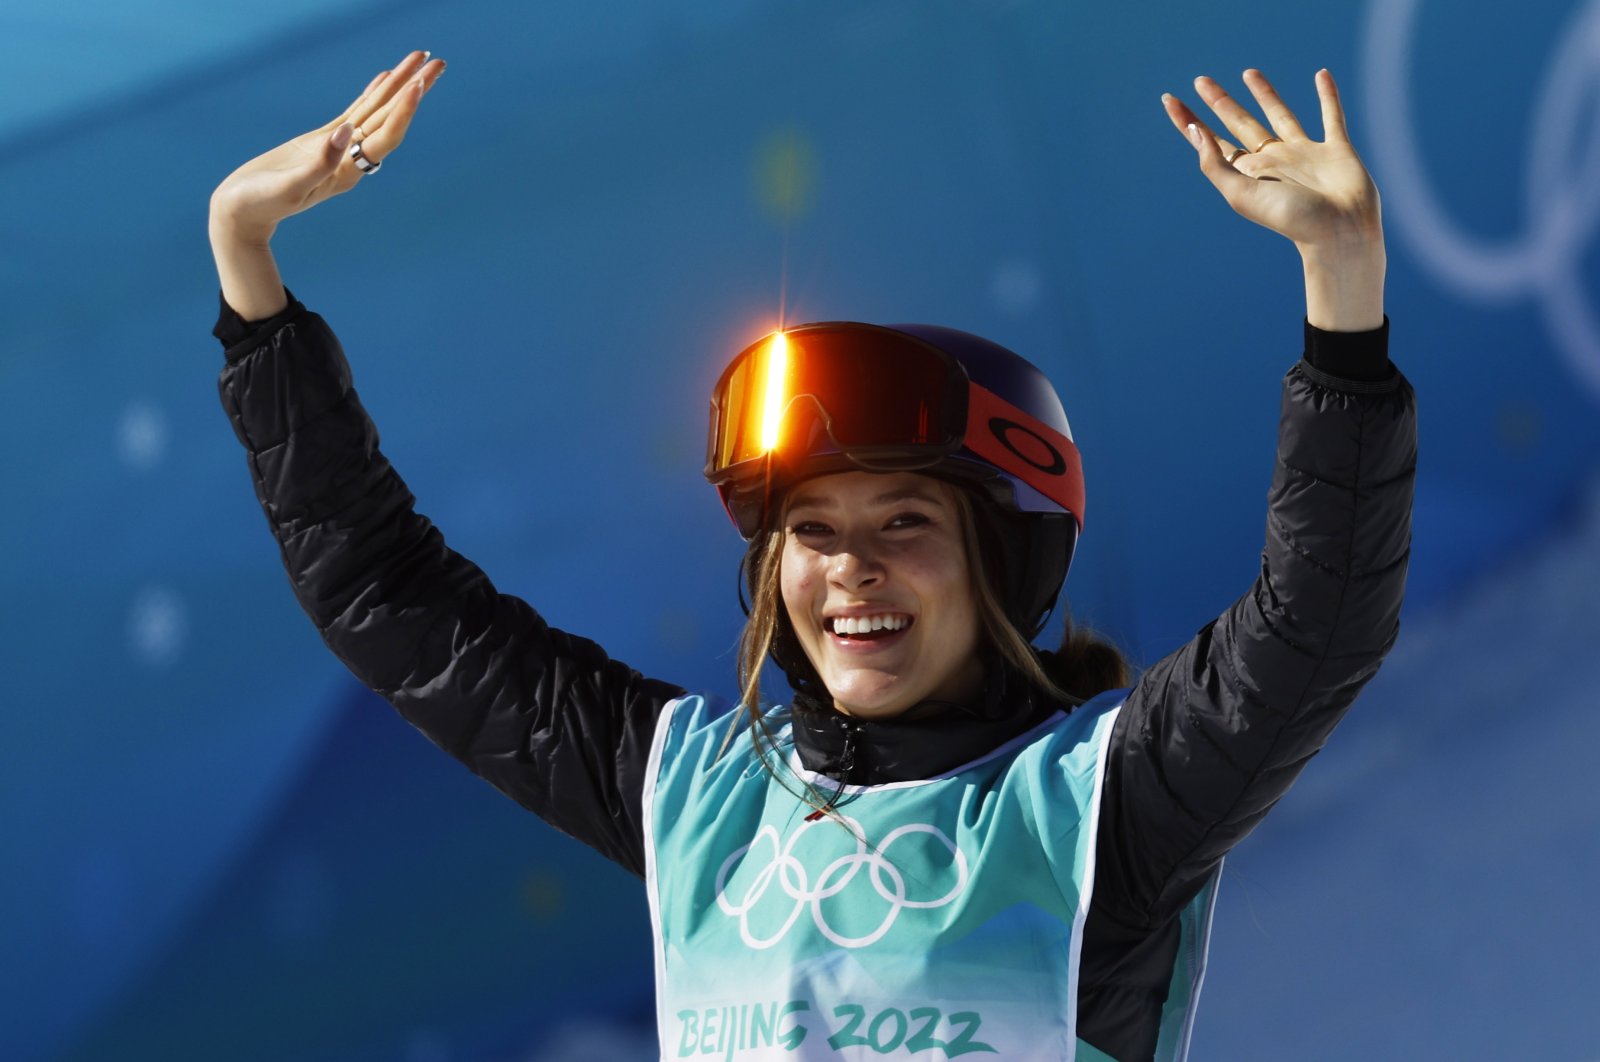 freestyle skiing at the 2022 winter olympics – men's big air